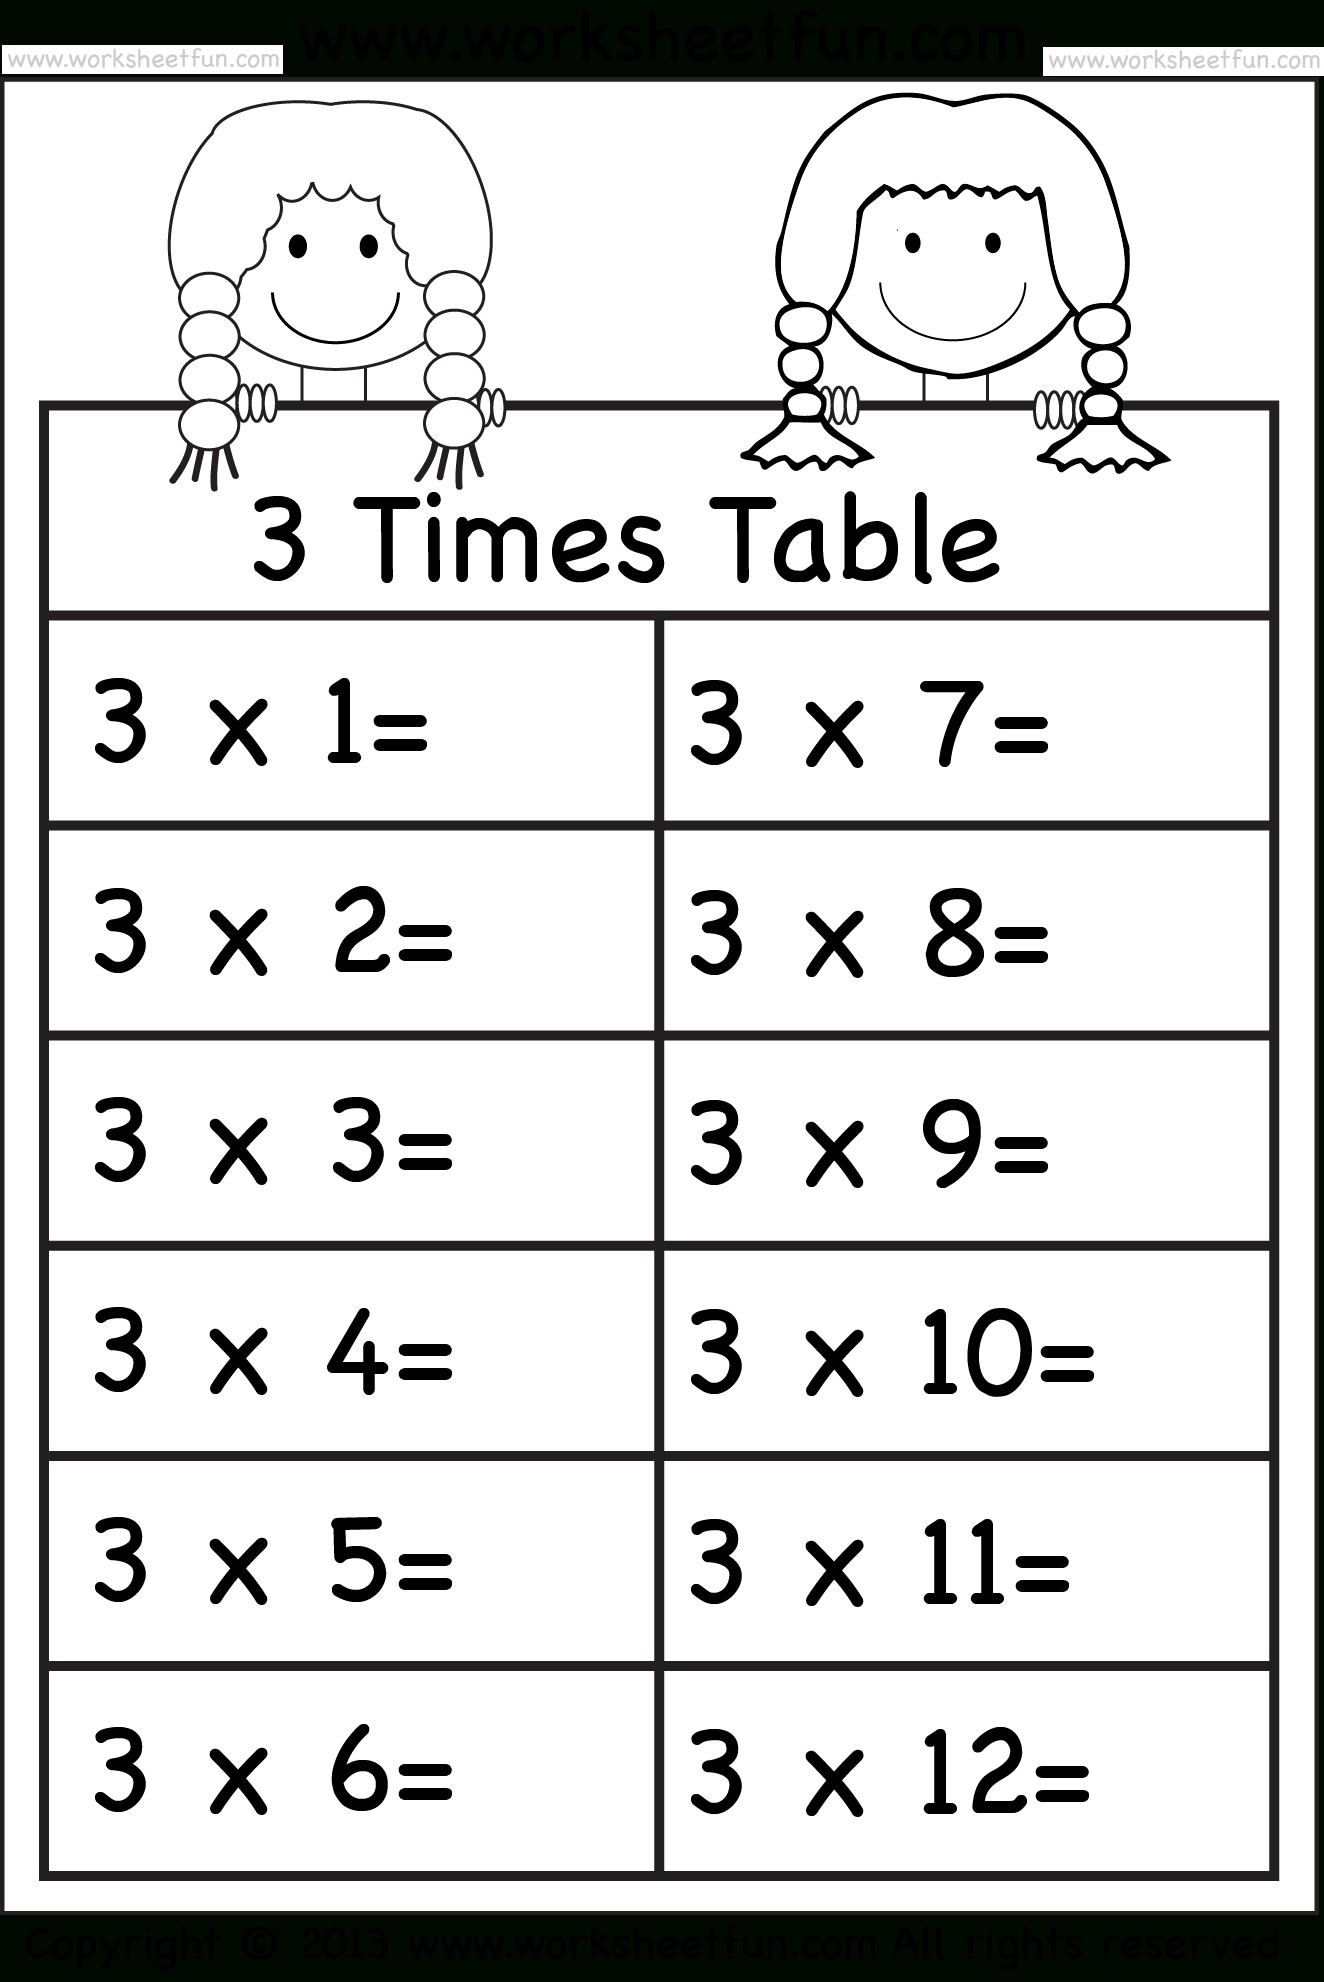 Times Table Practice Sheets Plmforme